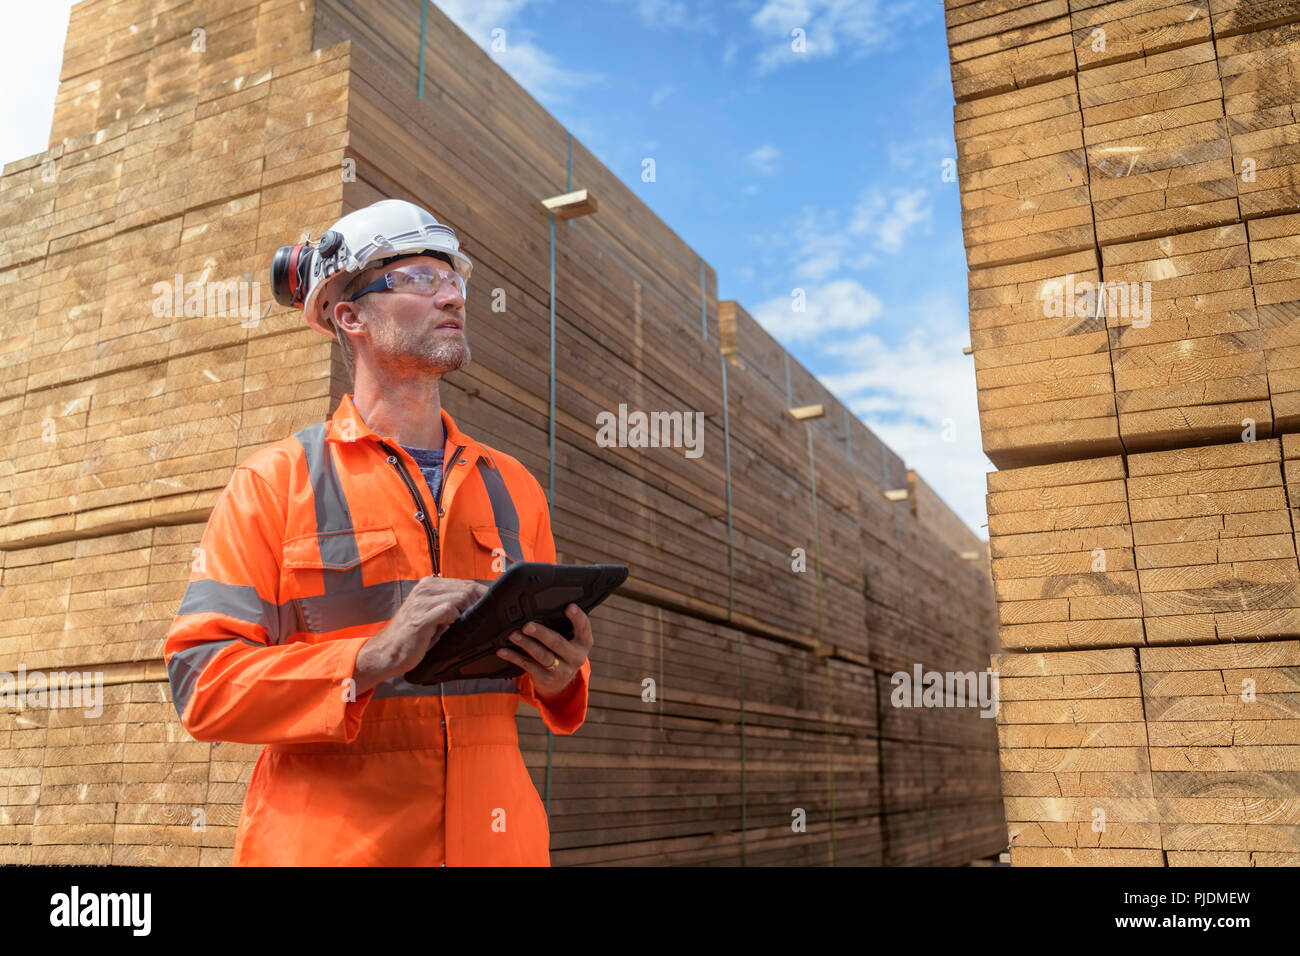 Worker with stacks of timber in storage at port Stock Photo